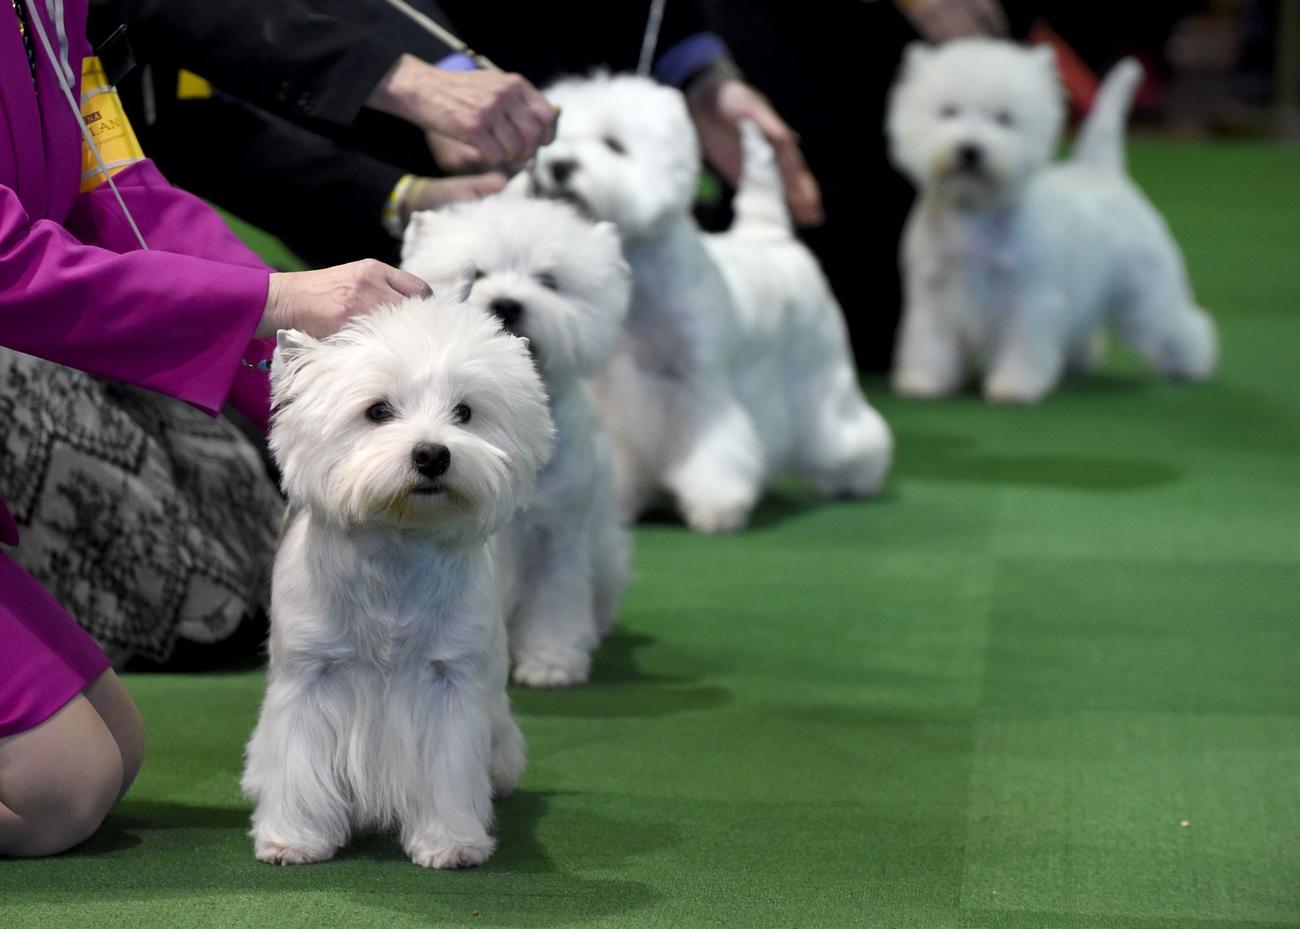 140th Westminster Kennel Club dog show - Los Angeles Times1300 x 929